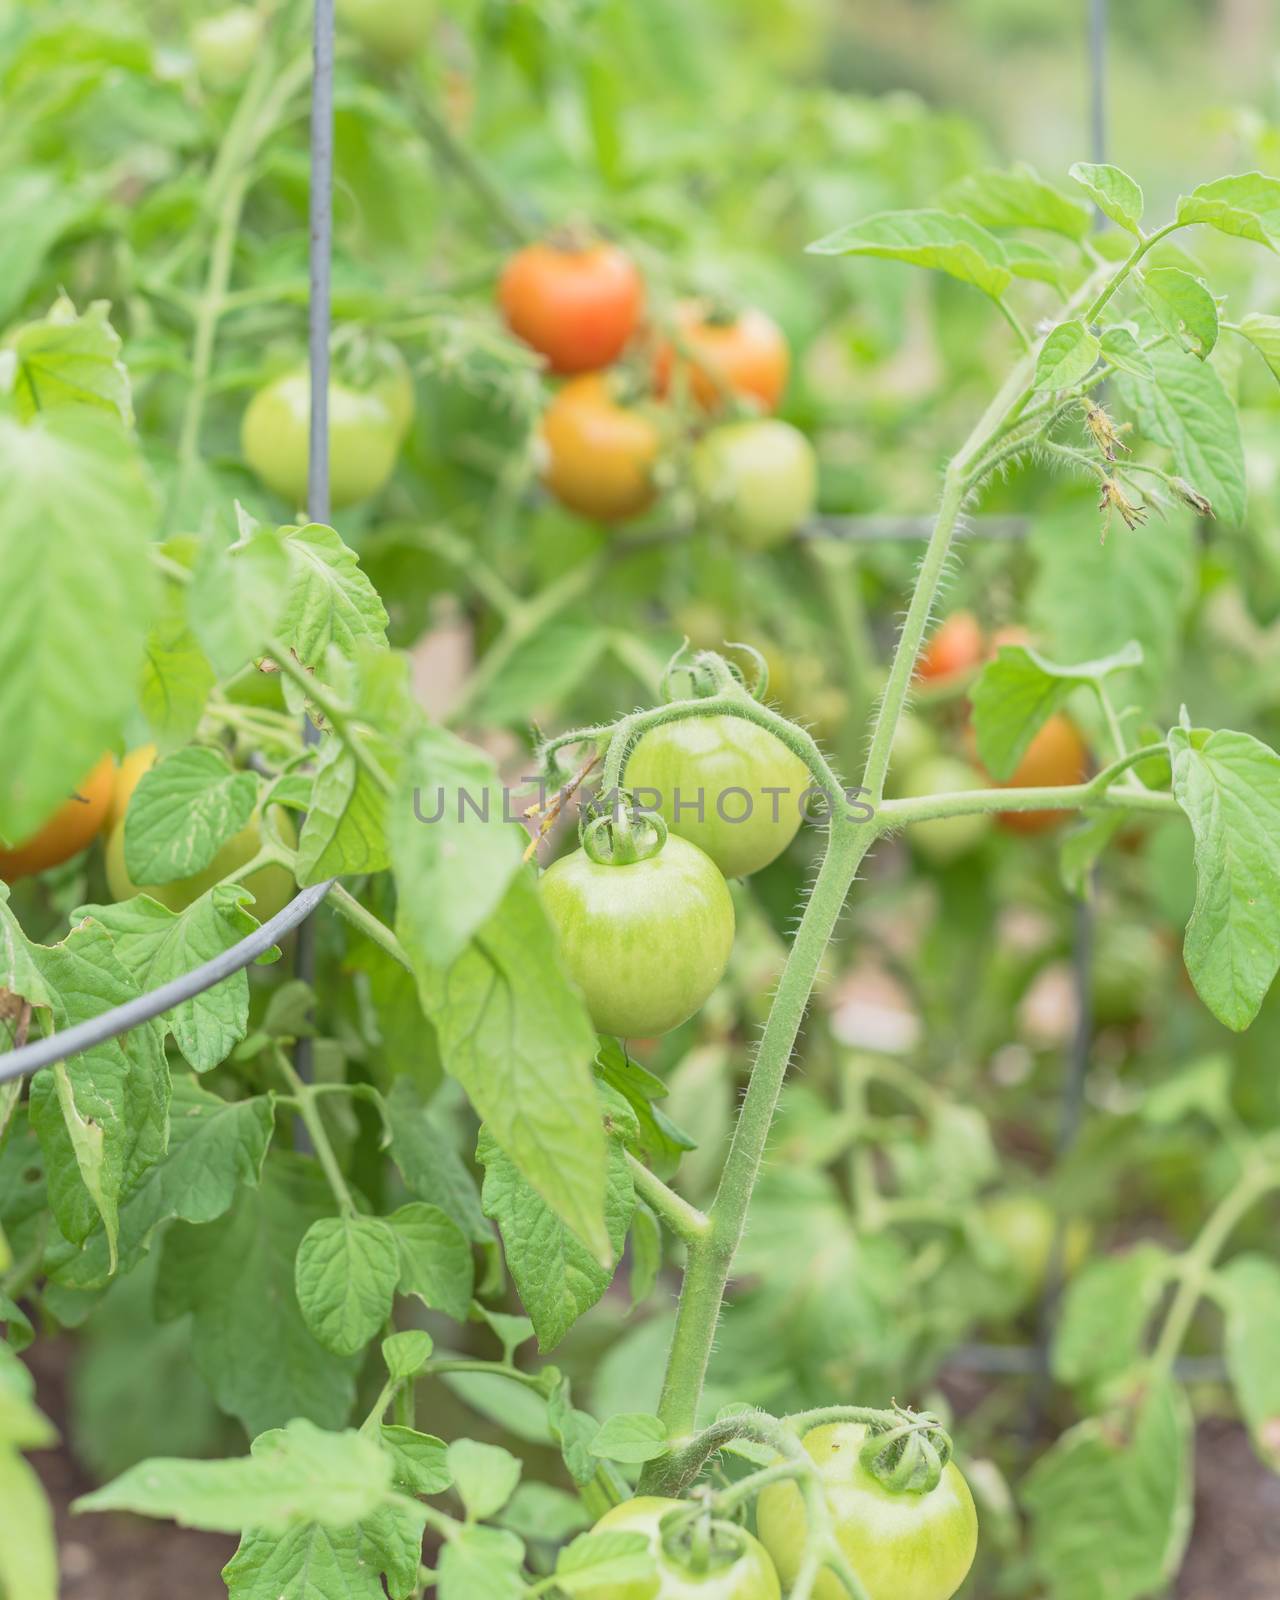 Red Racer or cocktail size tomato growing on tree vines at patch garden in Texas, America. Organic uniform in size and mature as a cluster of fruits with galvanized wire round structure